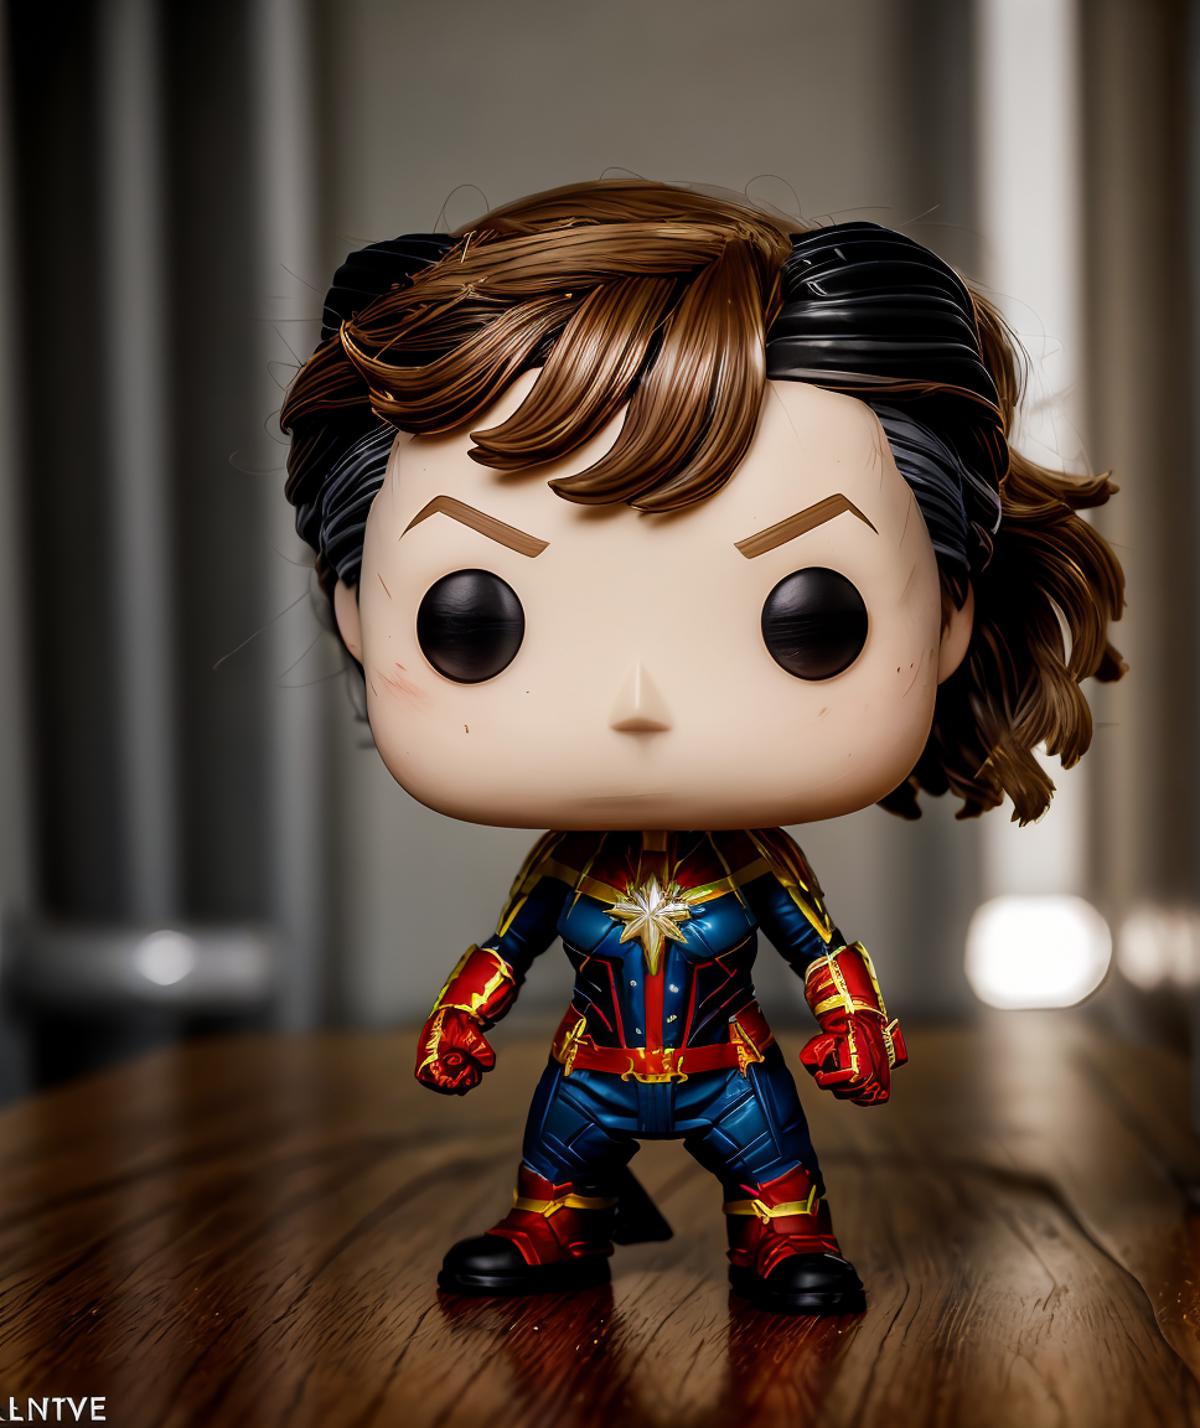 Funko Pop character LORA👑 image by Quiron